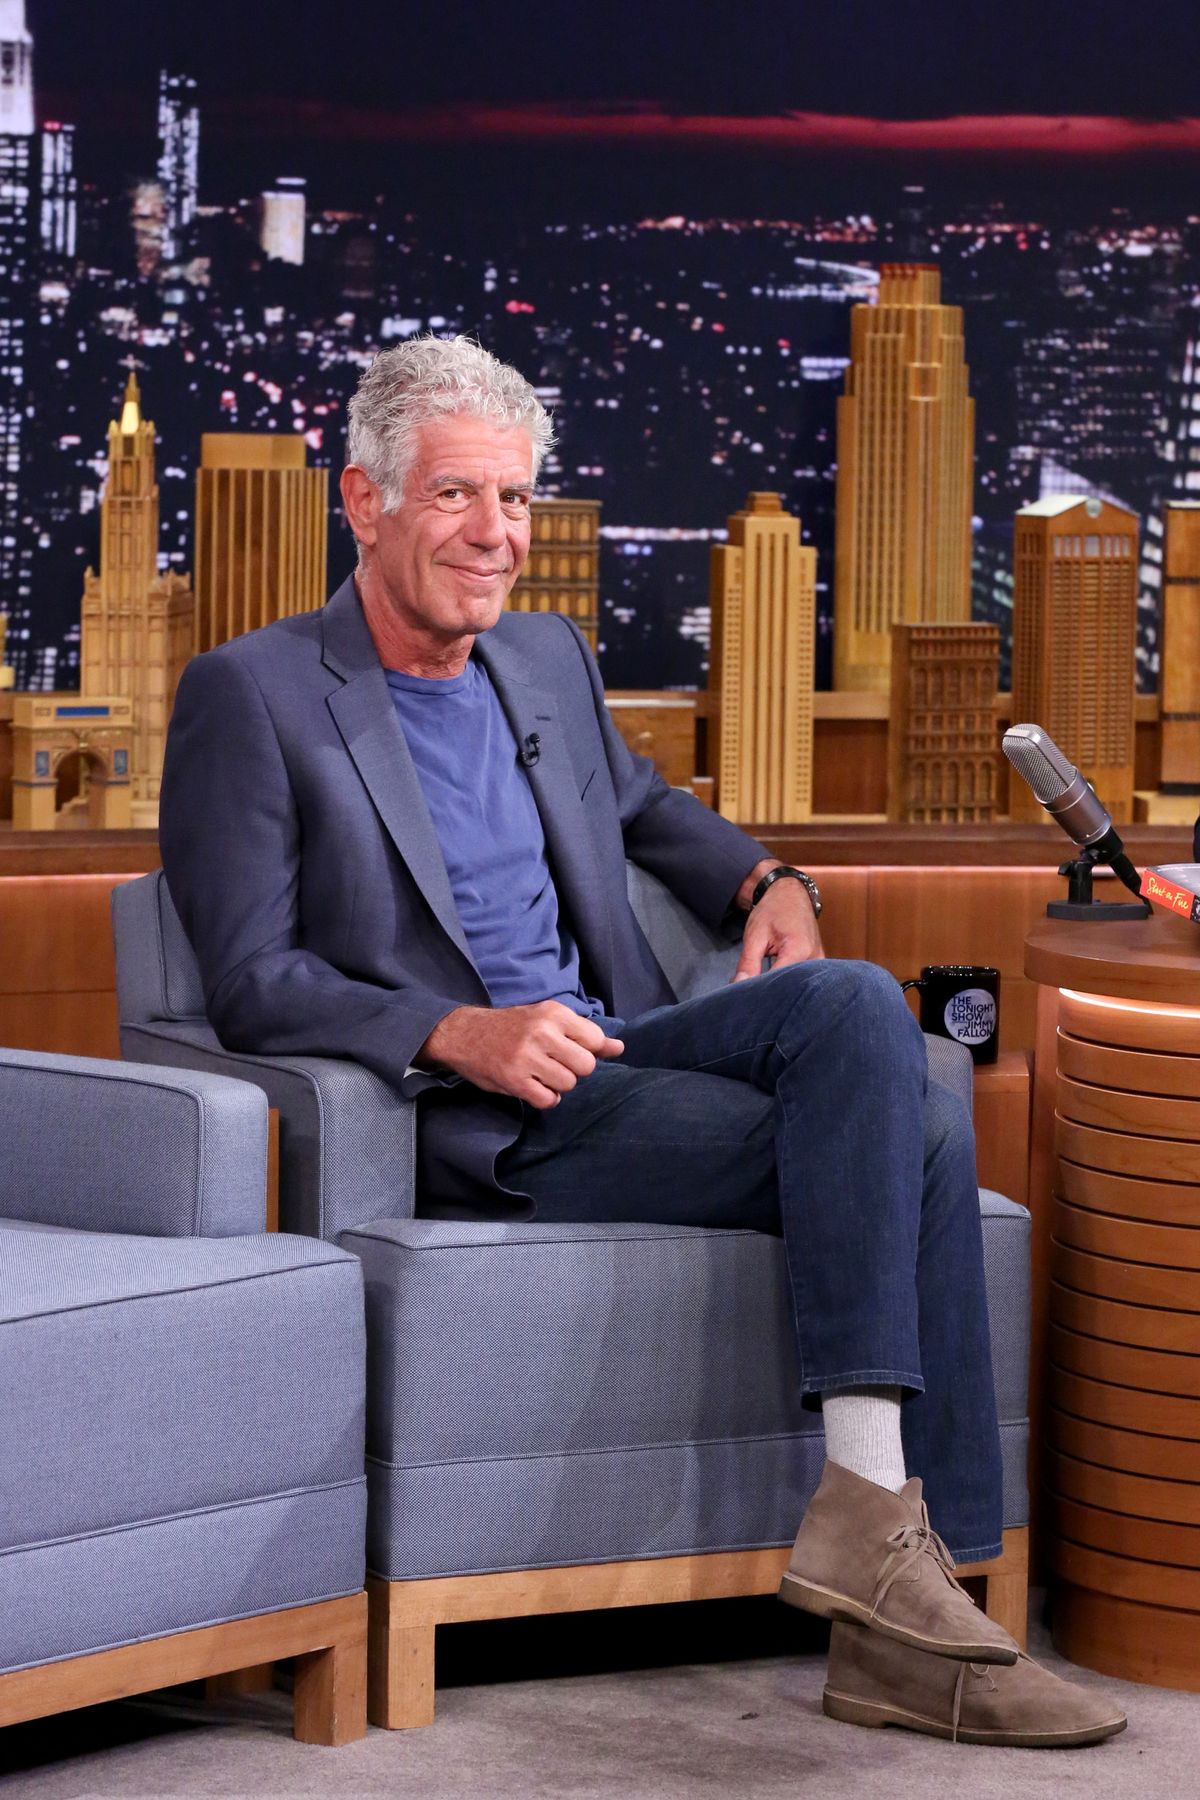 Anthony Bourdain Boots - Anthony Bourdain and His Go-To Shoes